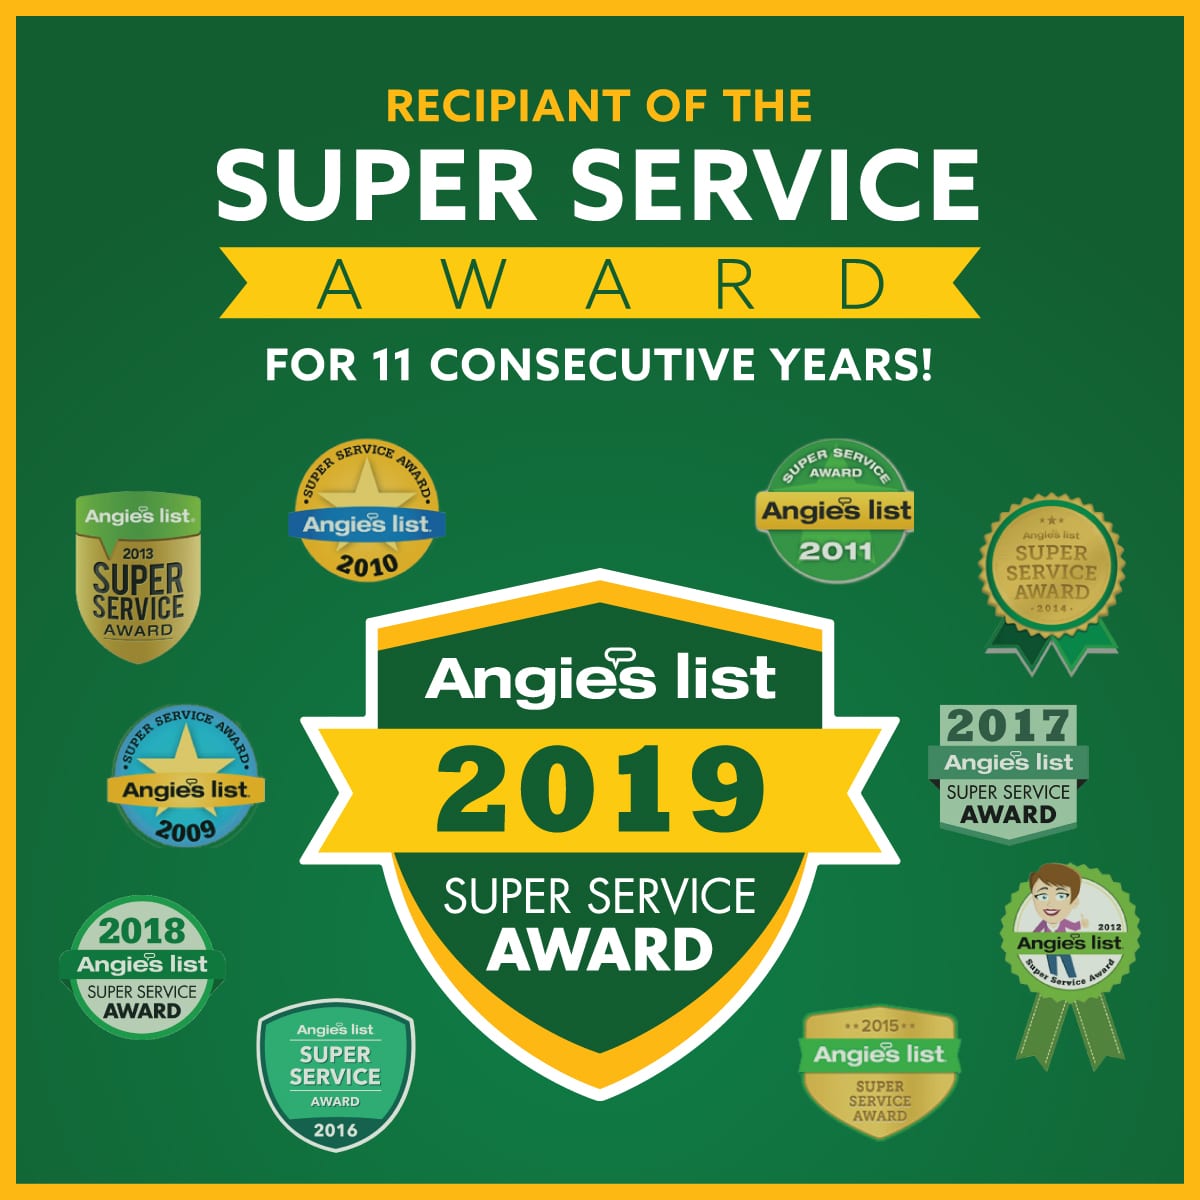 Super Service Award for 11 Consecutive Years